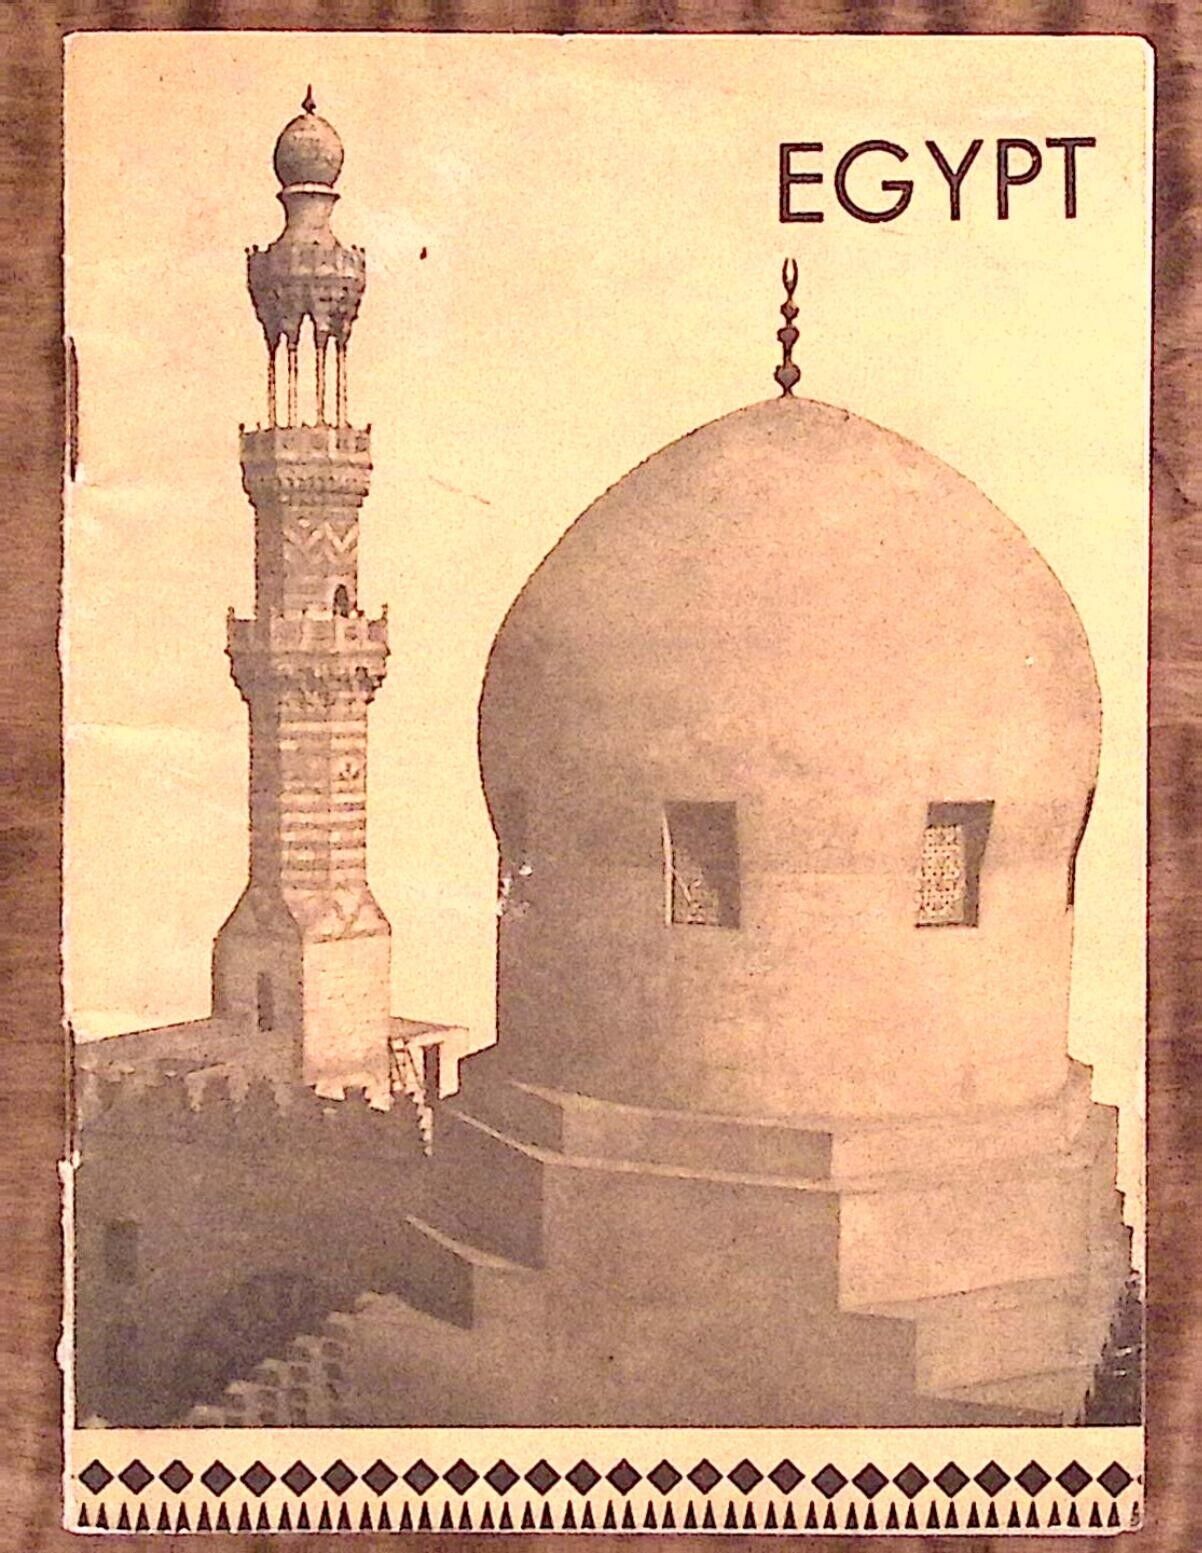 1945 AMERICAN RED CROSS TOURS TO CAIRO EGYPT TRAVEL GUIDE BOOKLET BROCHURE Z4041